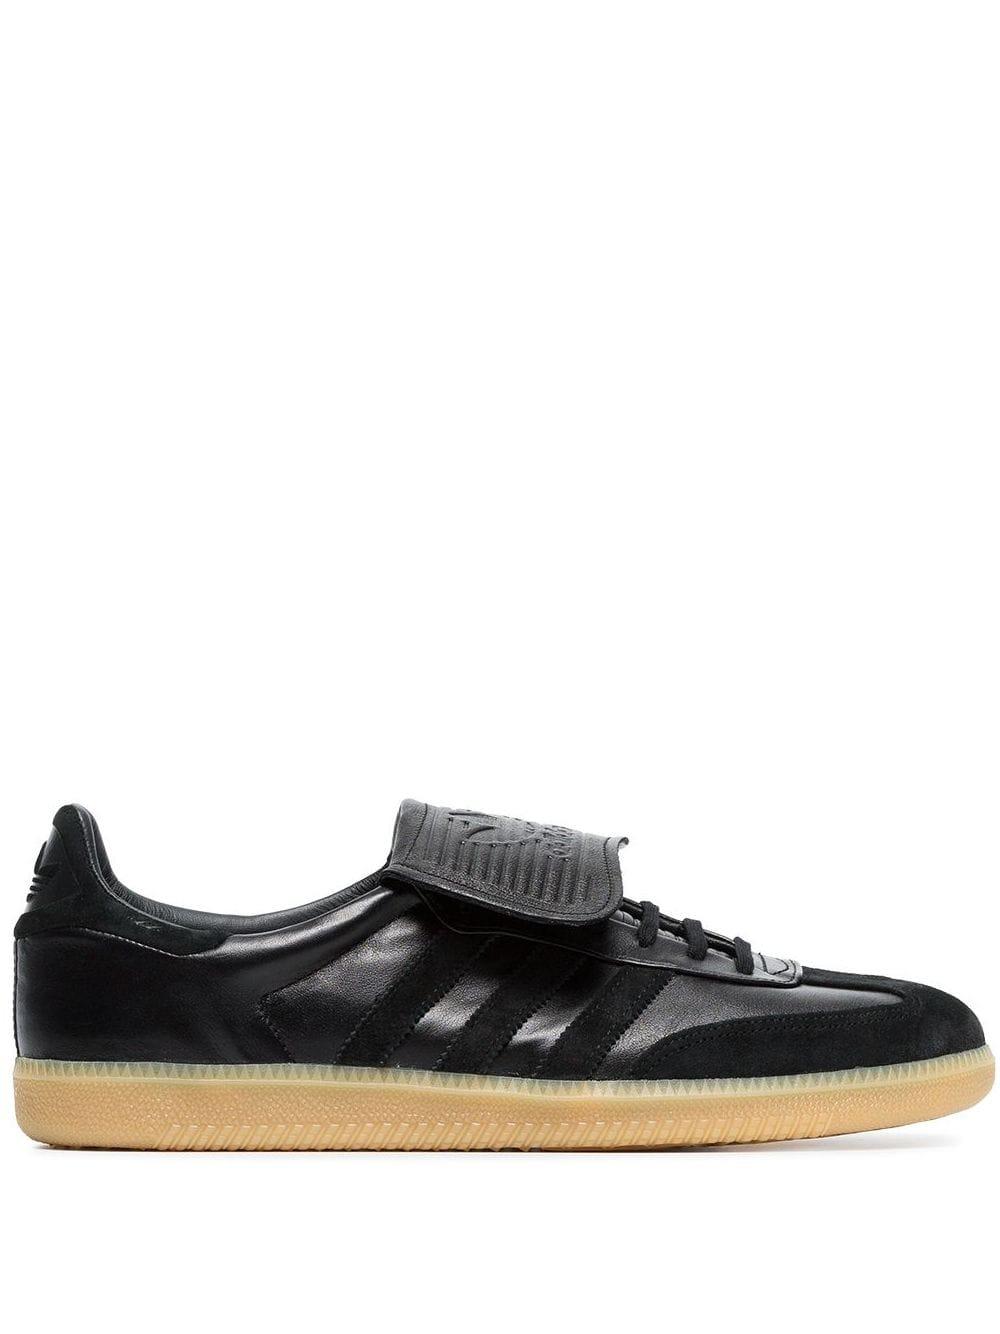 adidas Black Samba Recon Lt Leather Sneakers for Men | Lyst